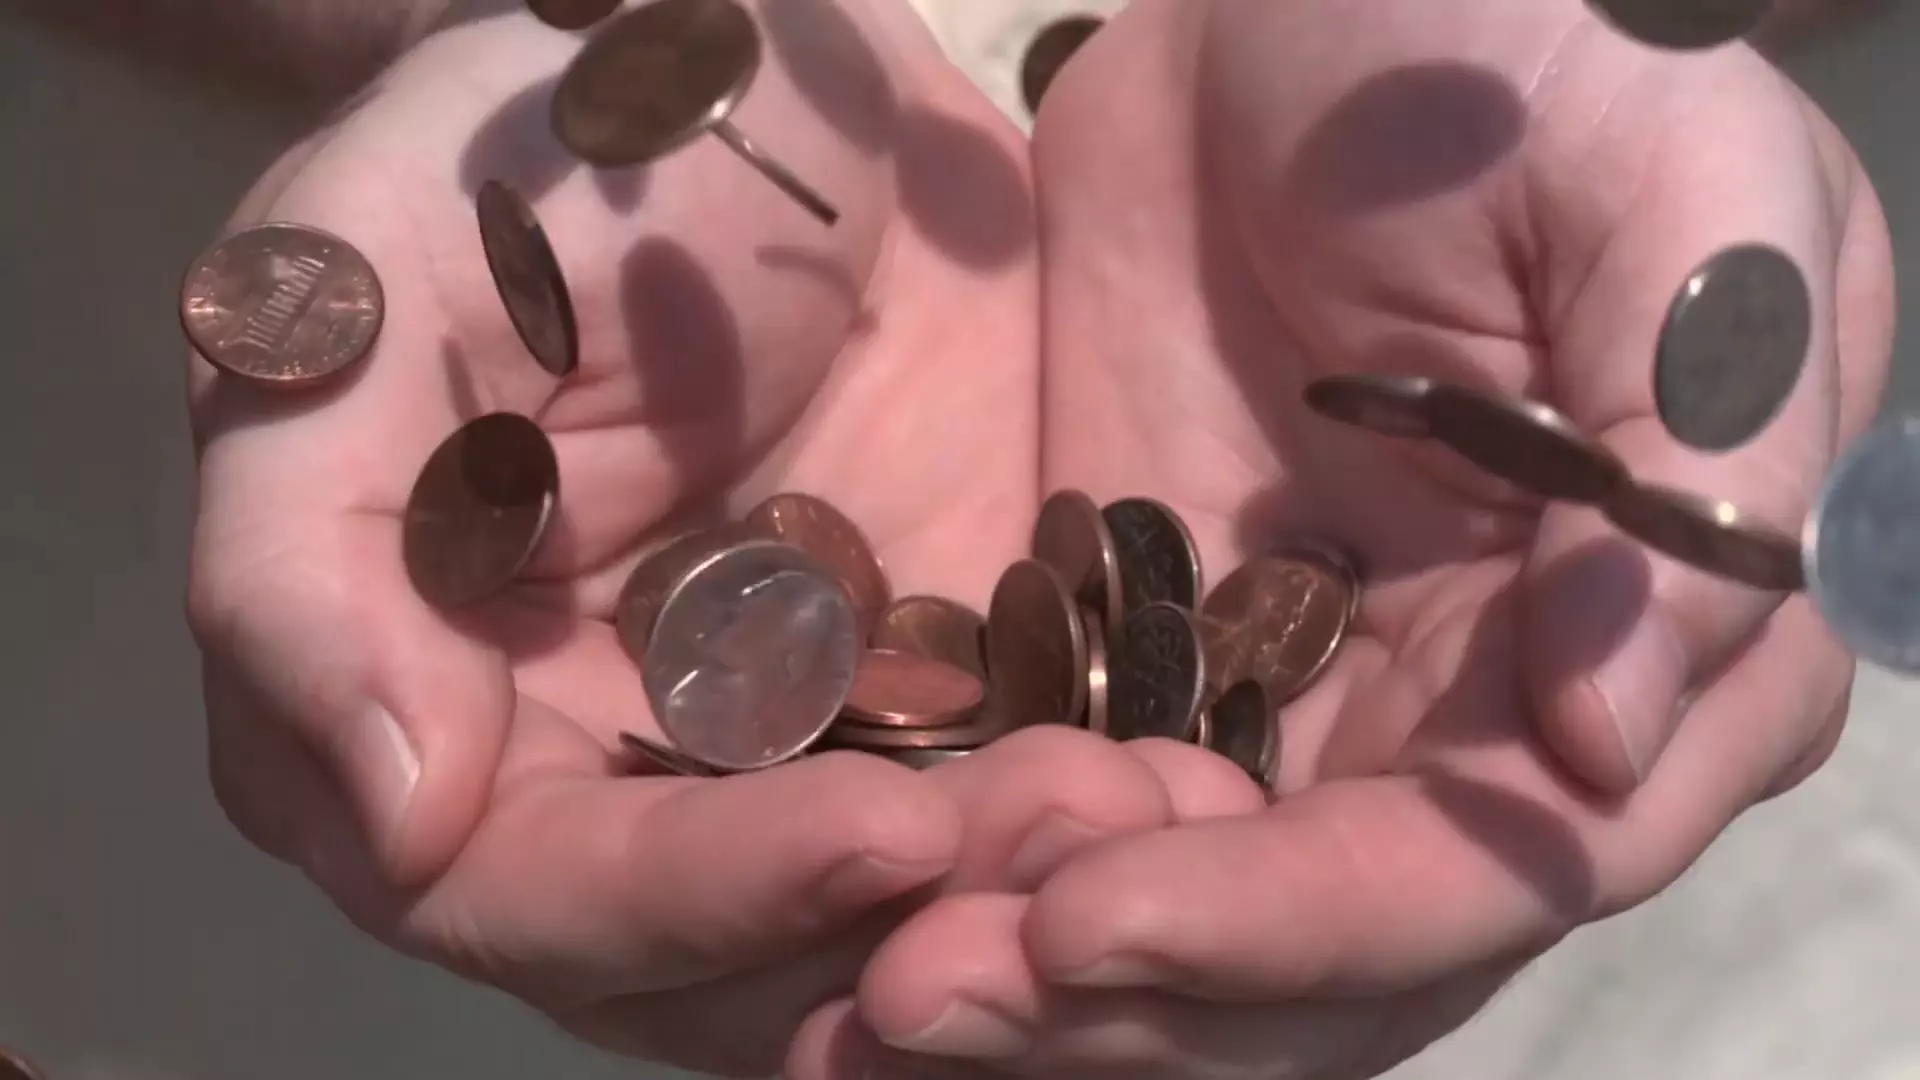 Coins dropping into a persons hands